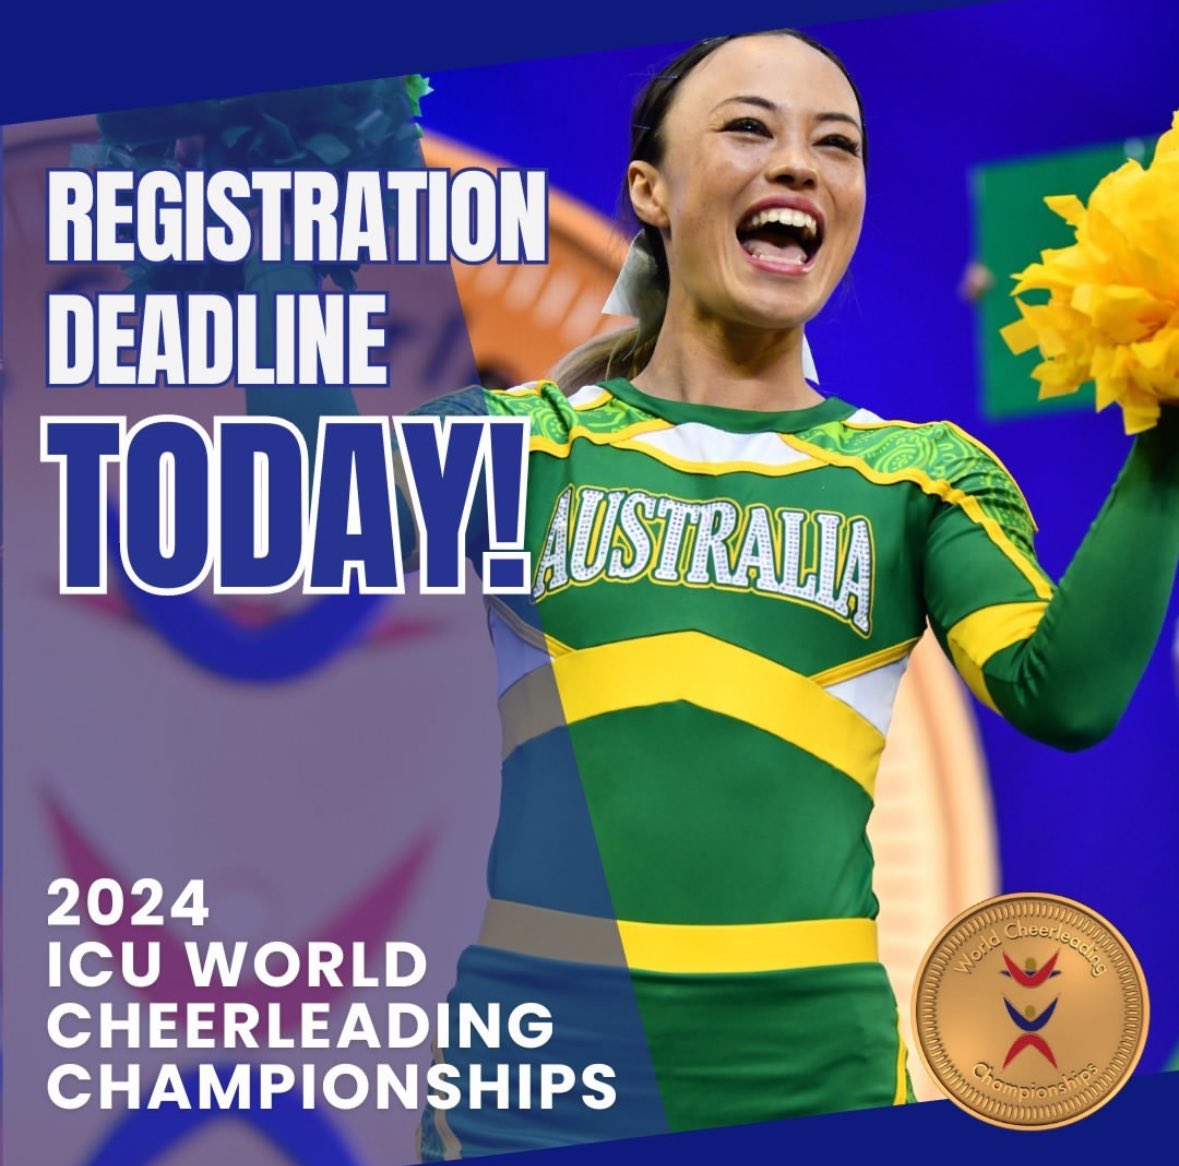 ❗️Final Day to Register❗️ Today is the last day for all teams to register for the 2024 ICU Junior World & World Cheerleading Championships! All event information can be found online at cheerunion.org/championships/… #icucheer #cheerleading #performancecheer #ICUWorlds2024